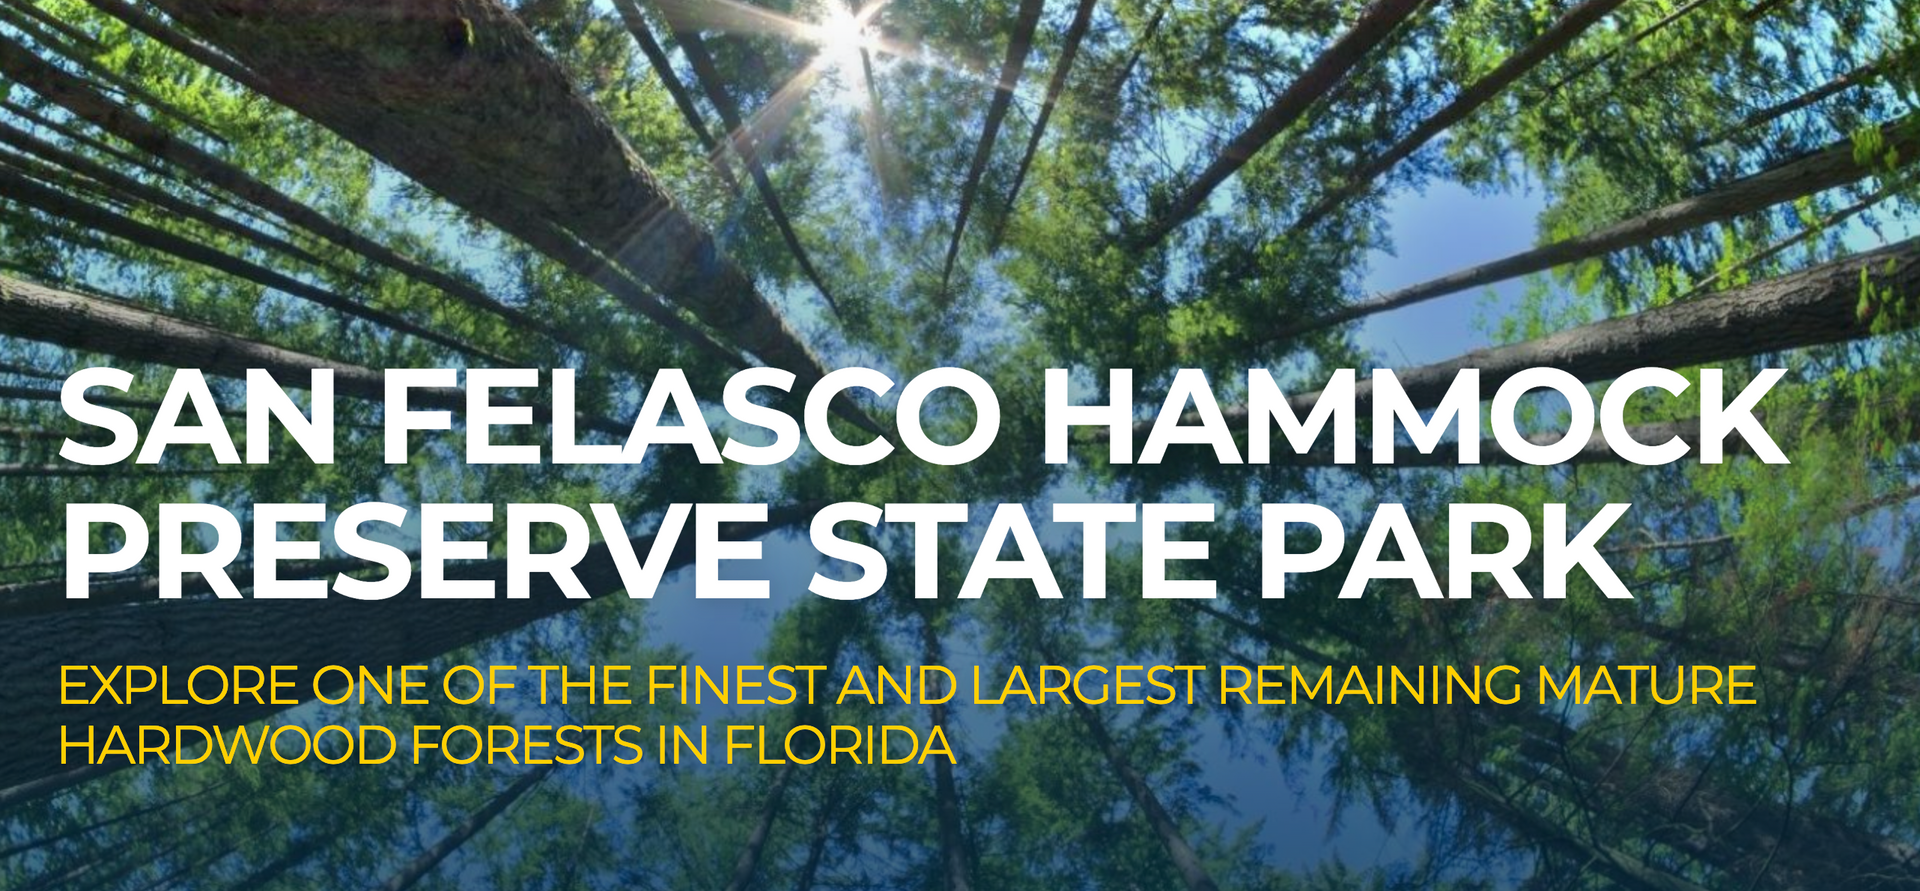 San Felasco Hammock Preserve State Park : A Perfect Adventure for StayGainesville guests